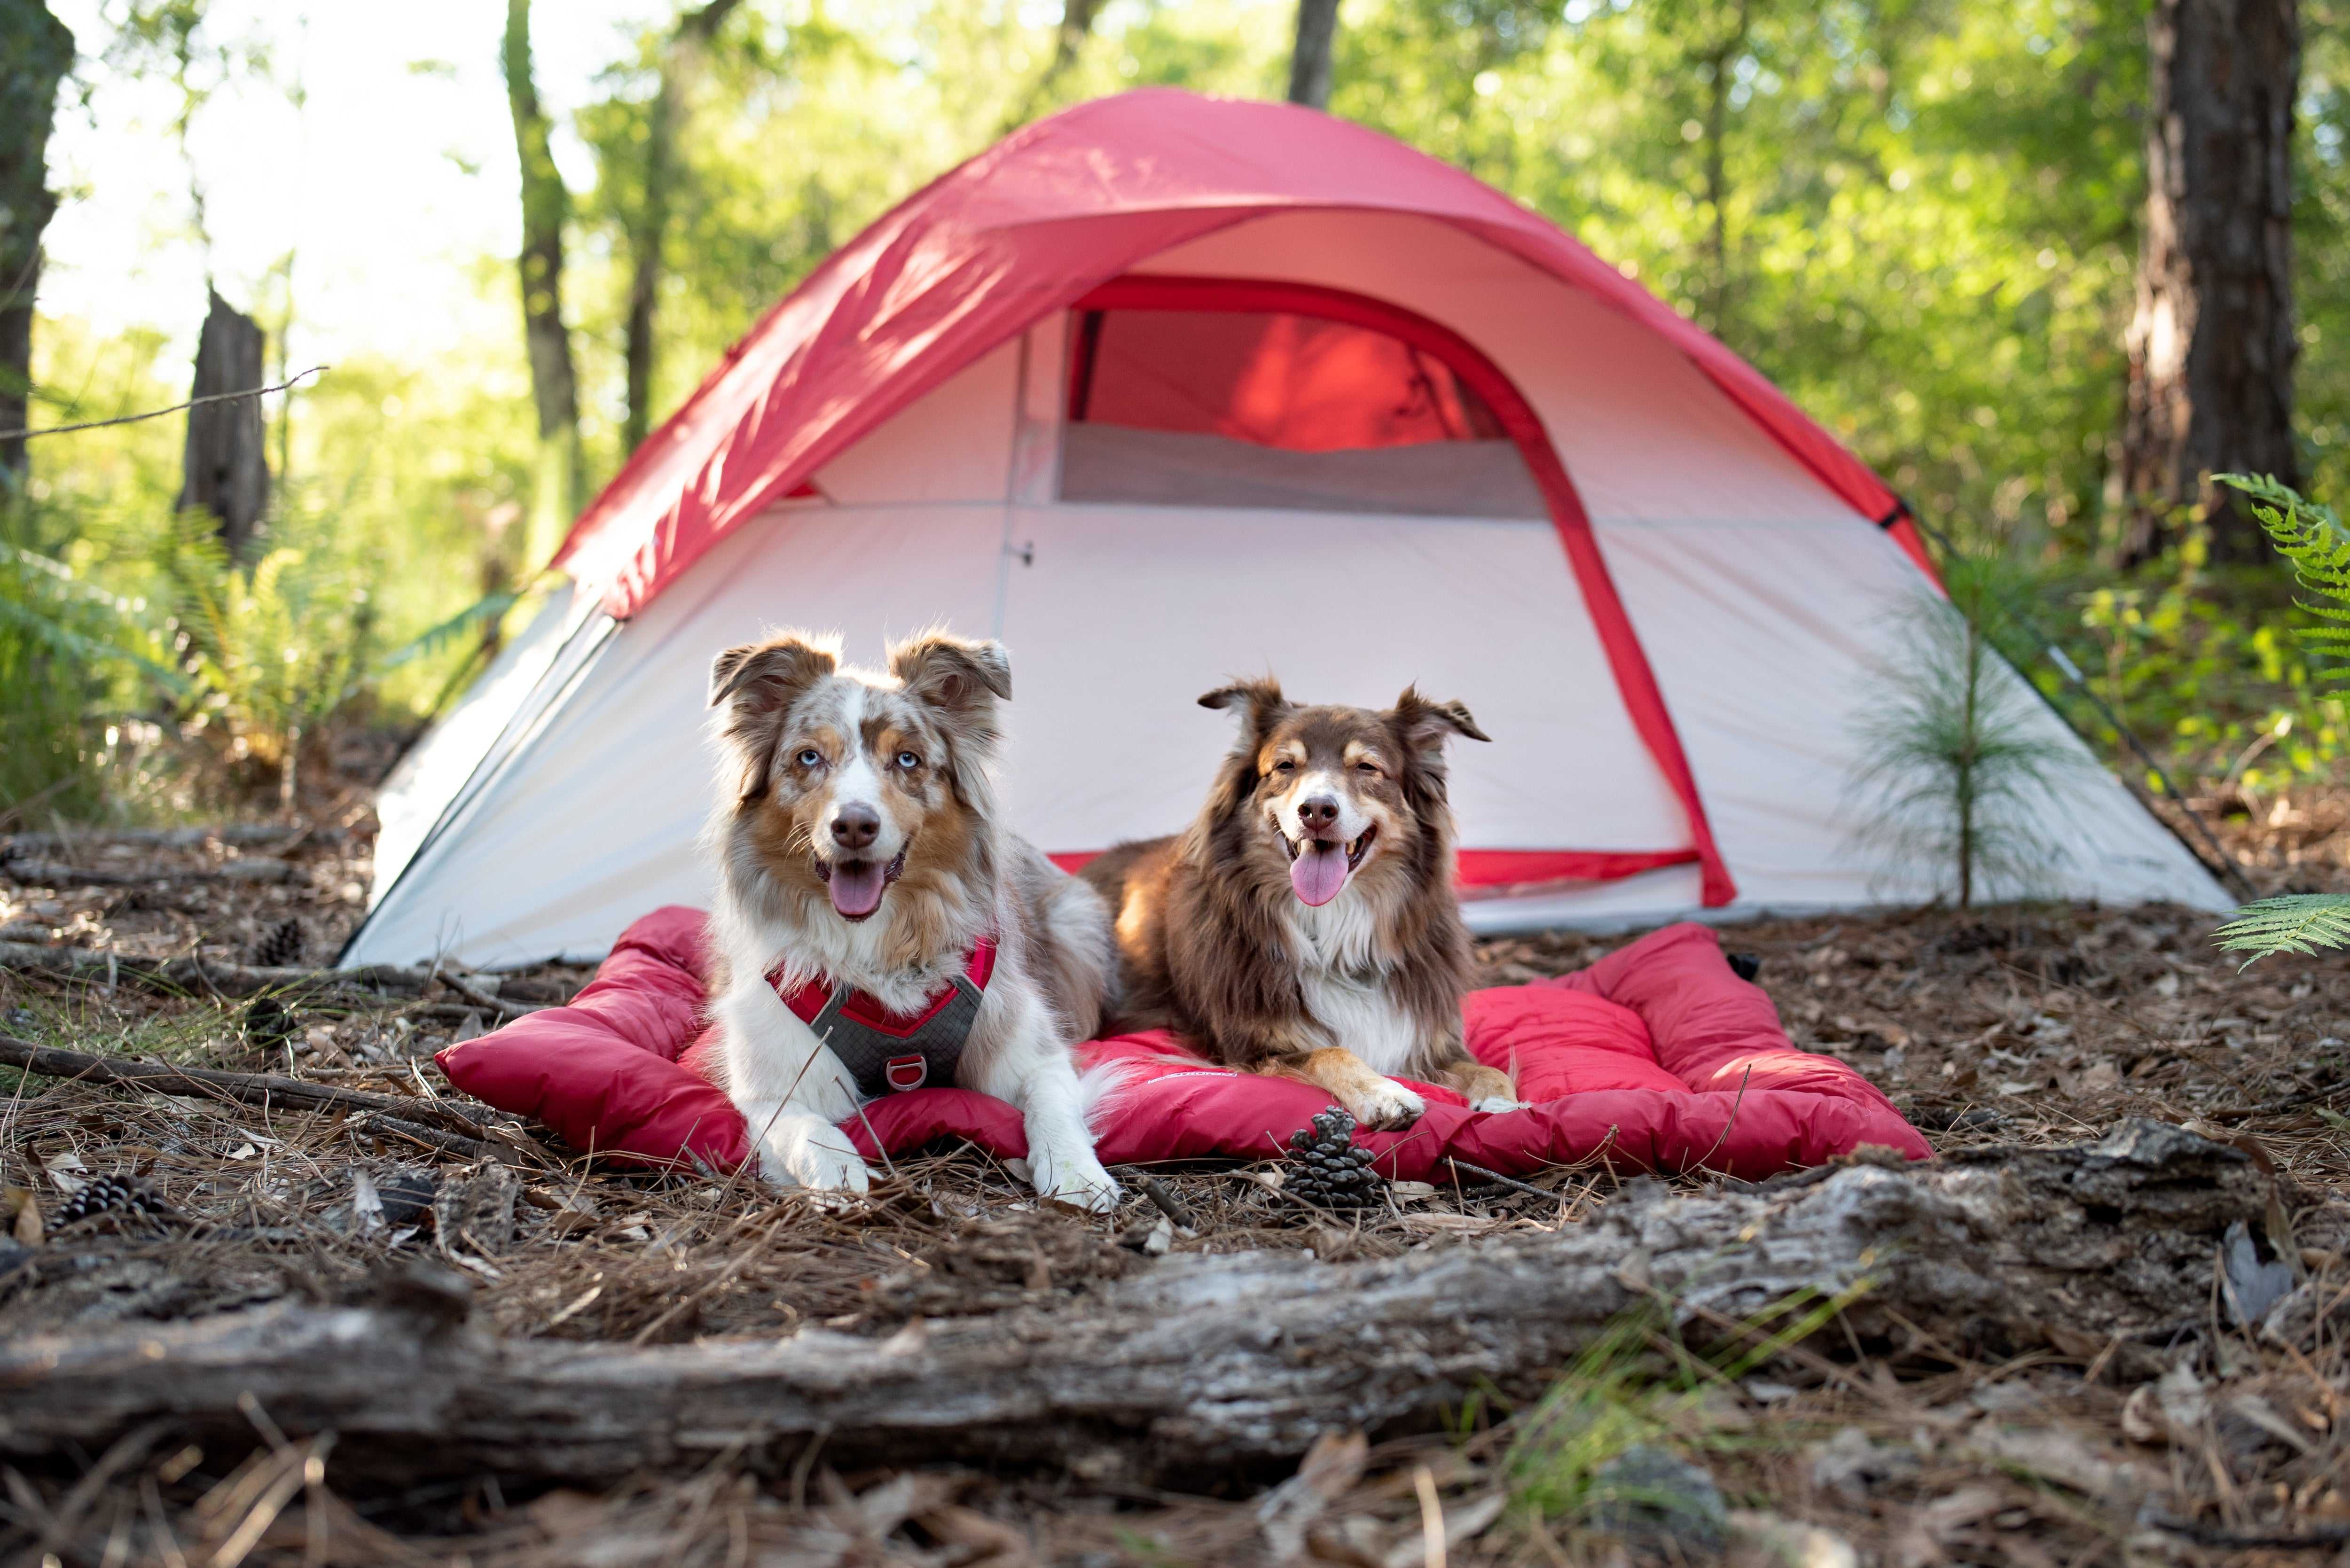 How to prep for a camping trip with your dog